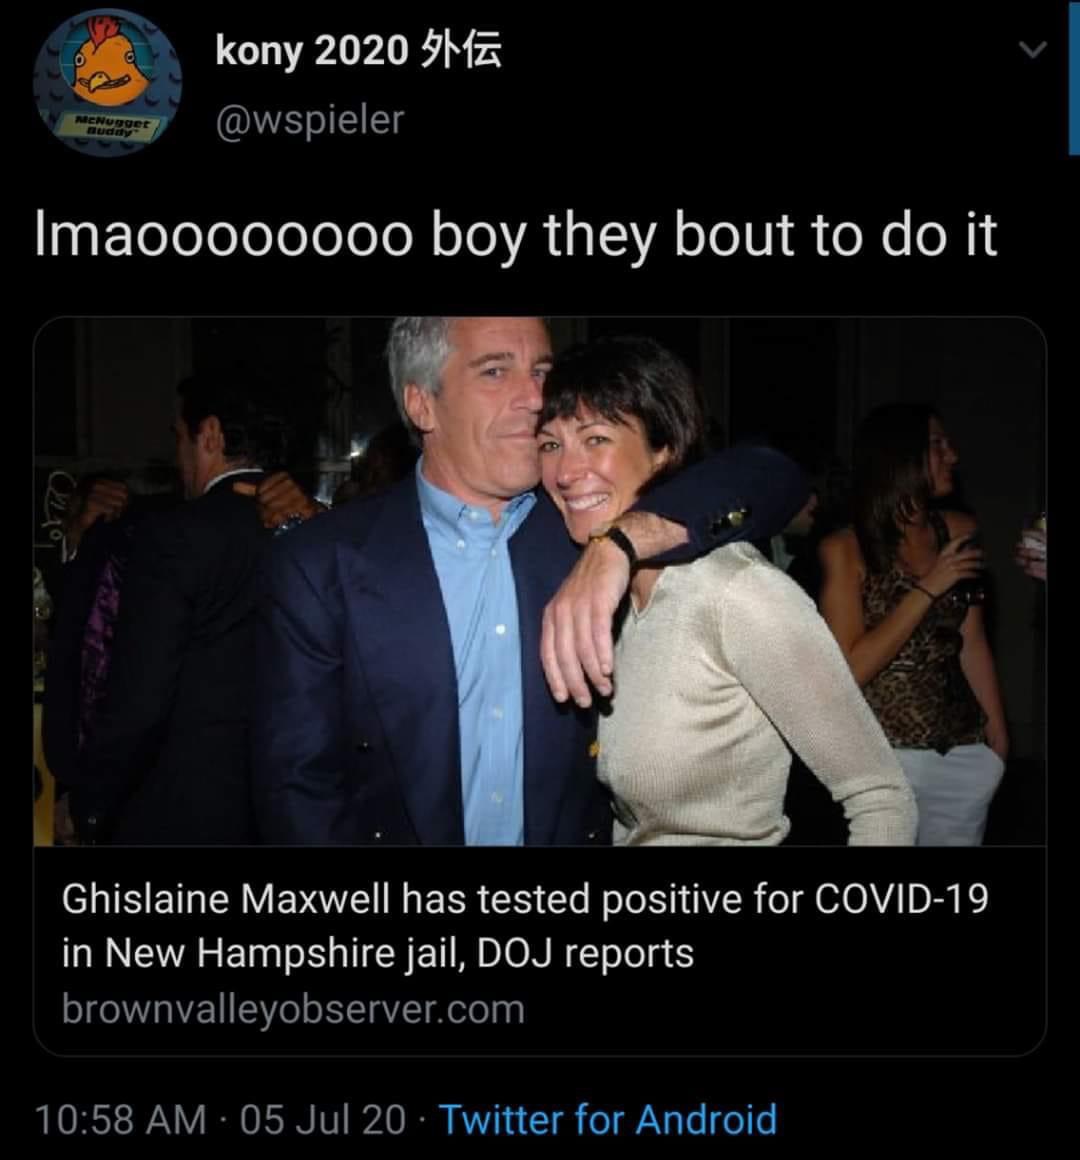 ghislaine maxwell - kony 2020 51 MENugget Imaooo00000 boy they bout to do it Ghislaine Maxwell has tested positive for Covid19 in New Hampshire jail, Doj reports brownvalleyobserver.com 05 Jul 20 Twitter for Android